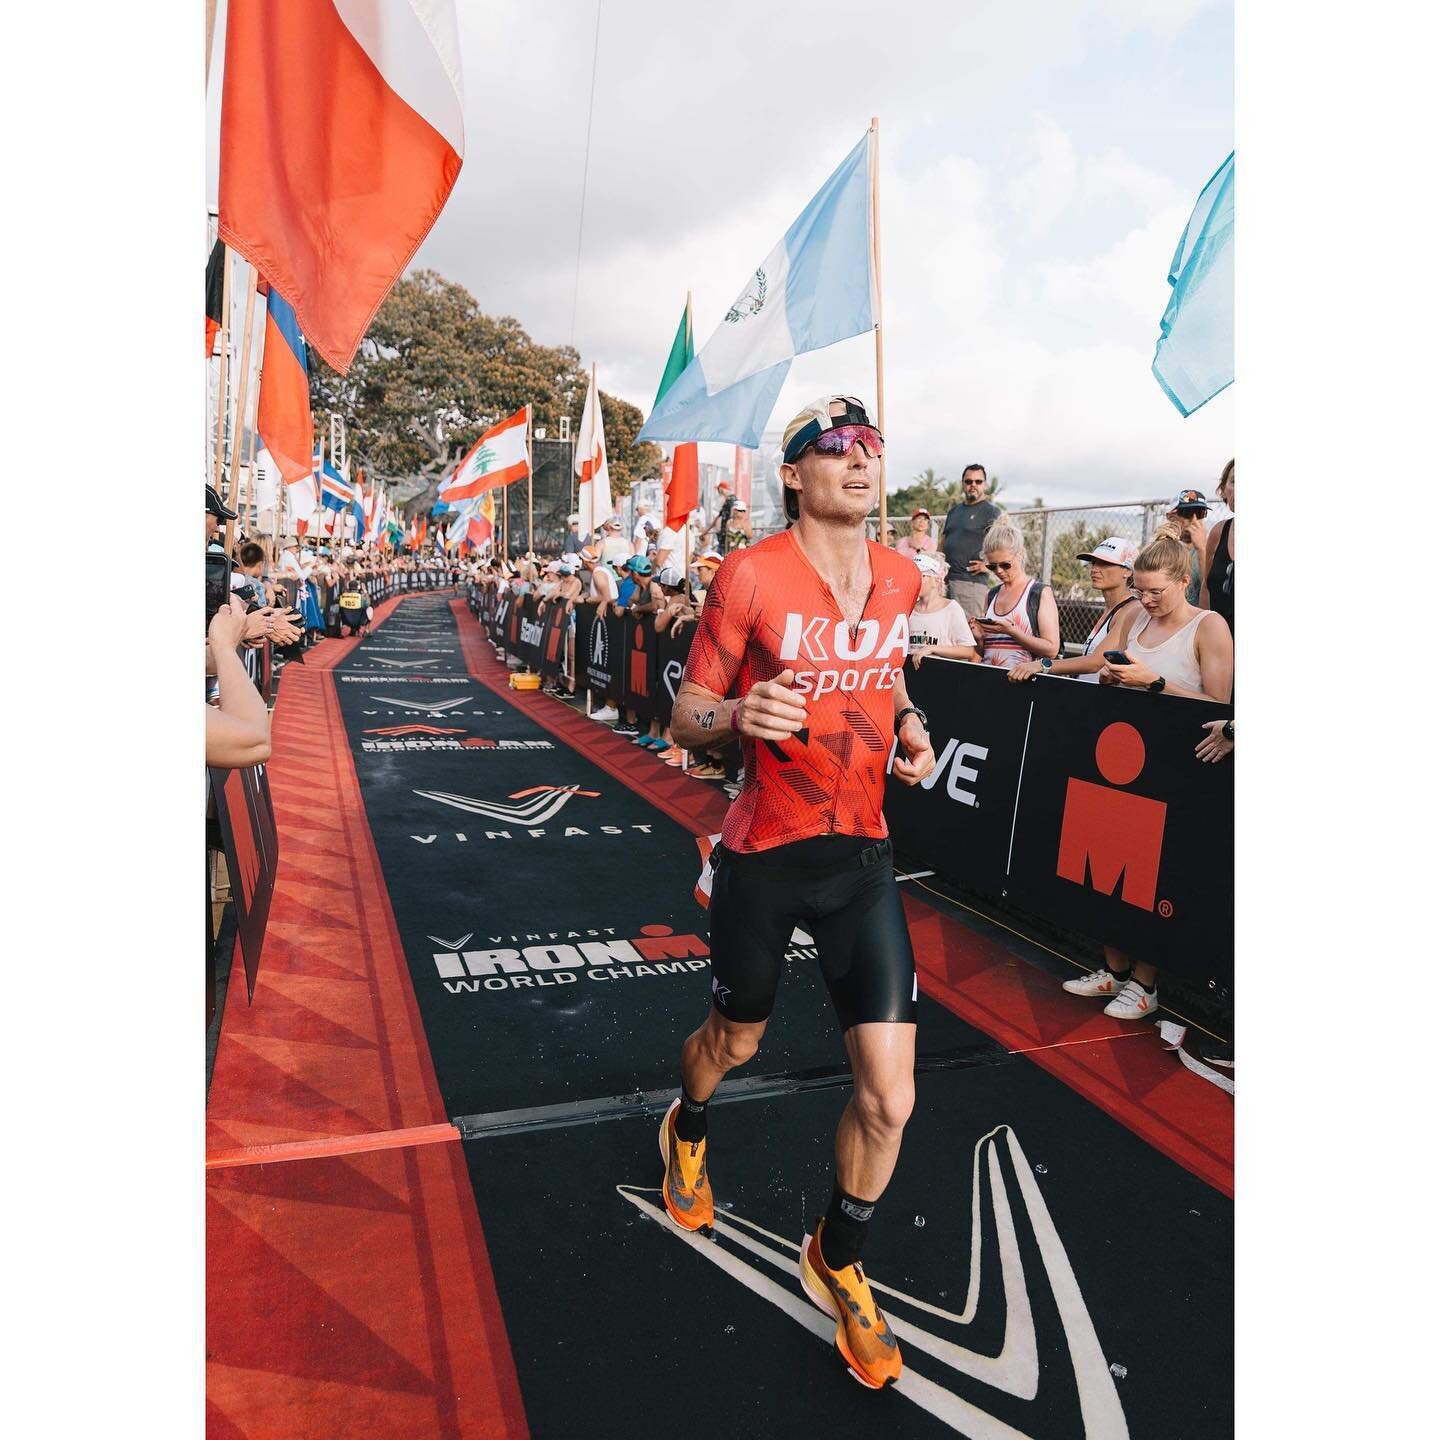 Sub 10 in his first Ironman World Championships and third-ever Ironman. The previous two in the last five months at Port Mac and Cairns.

To say Gareth&rsquo;s had a busy year is an understatement and proof that true grit can pay off. Having just mis